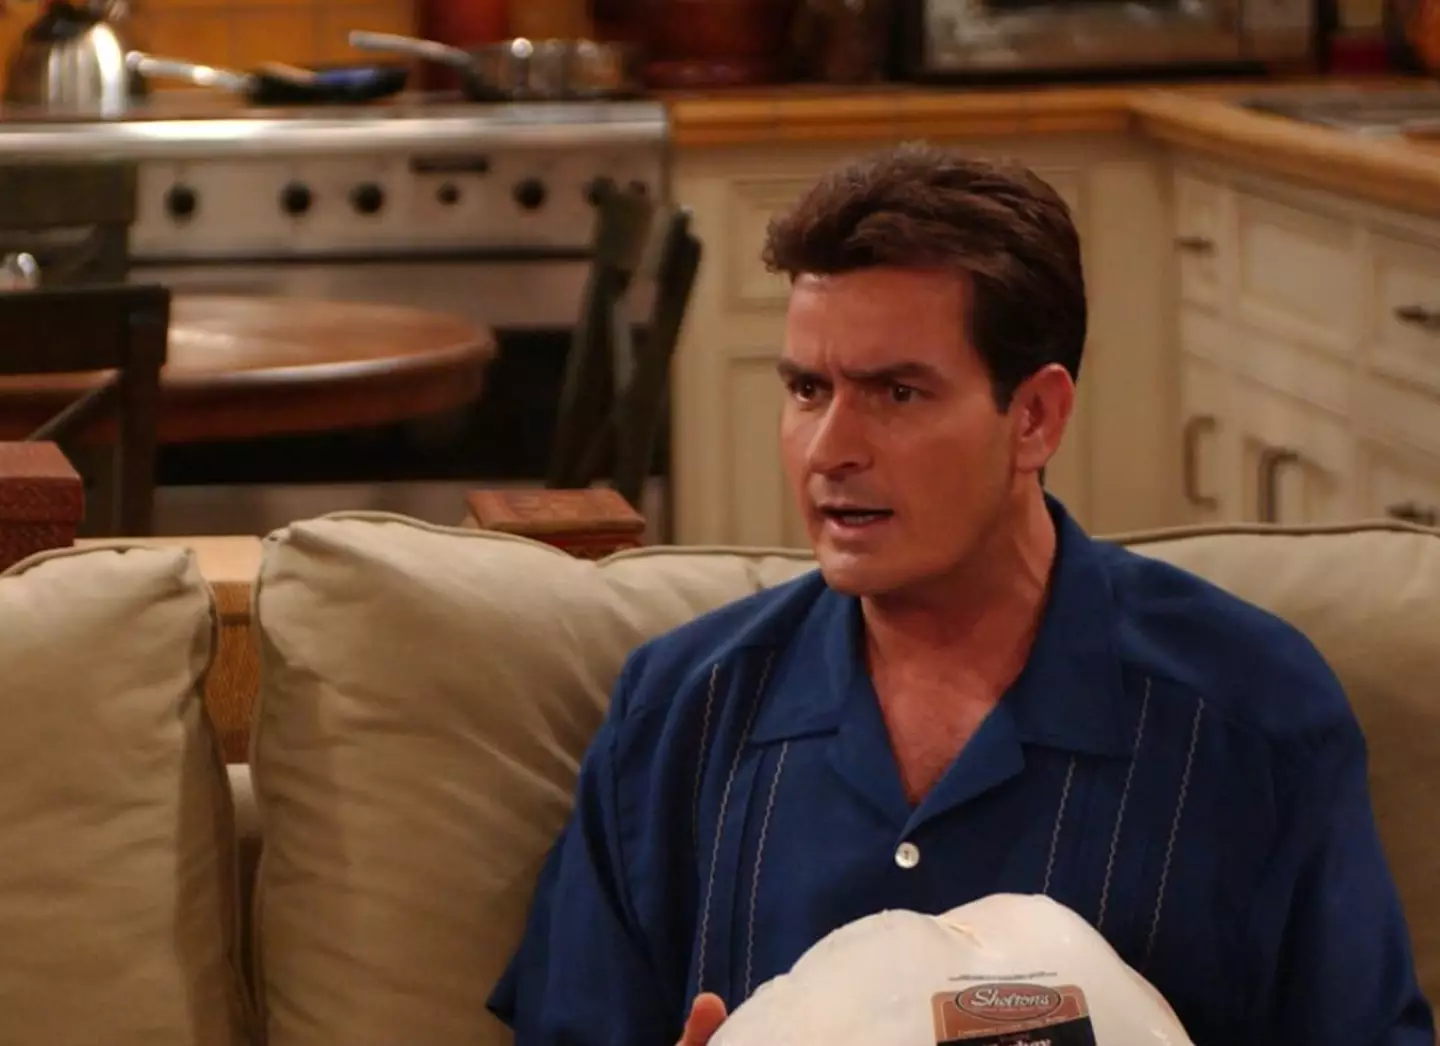 Charlie Sheen is best known for starring in Two and a Half Men.